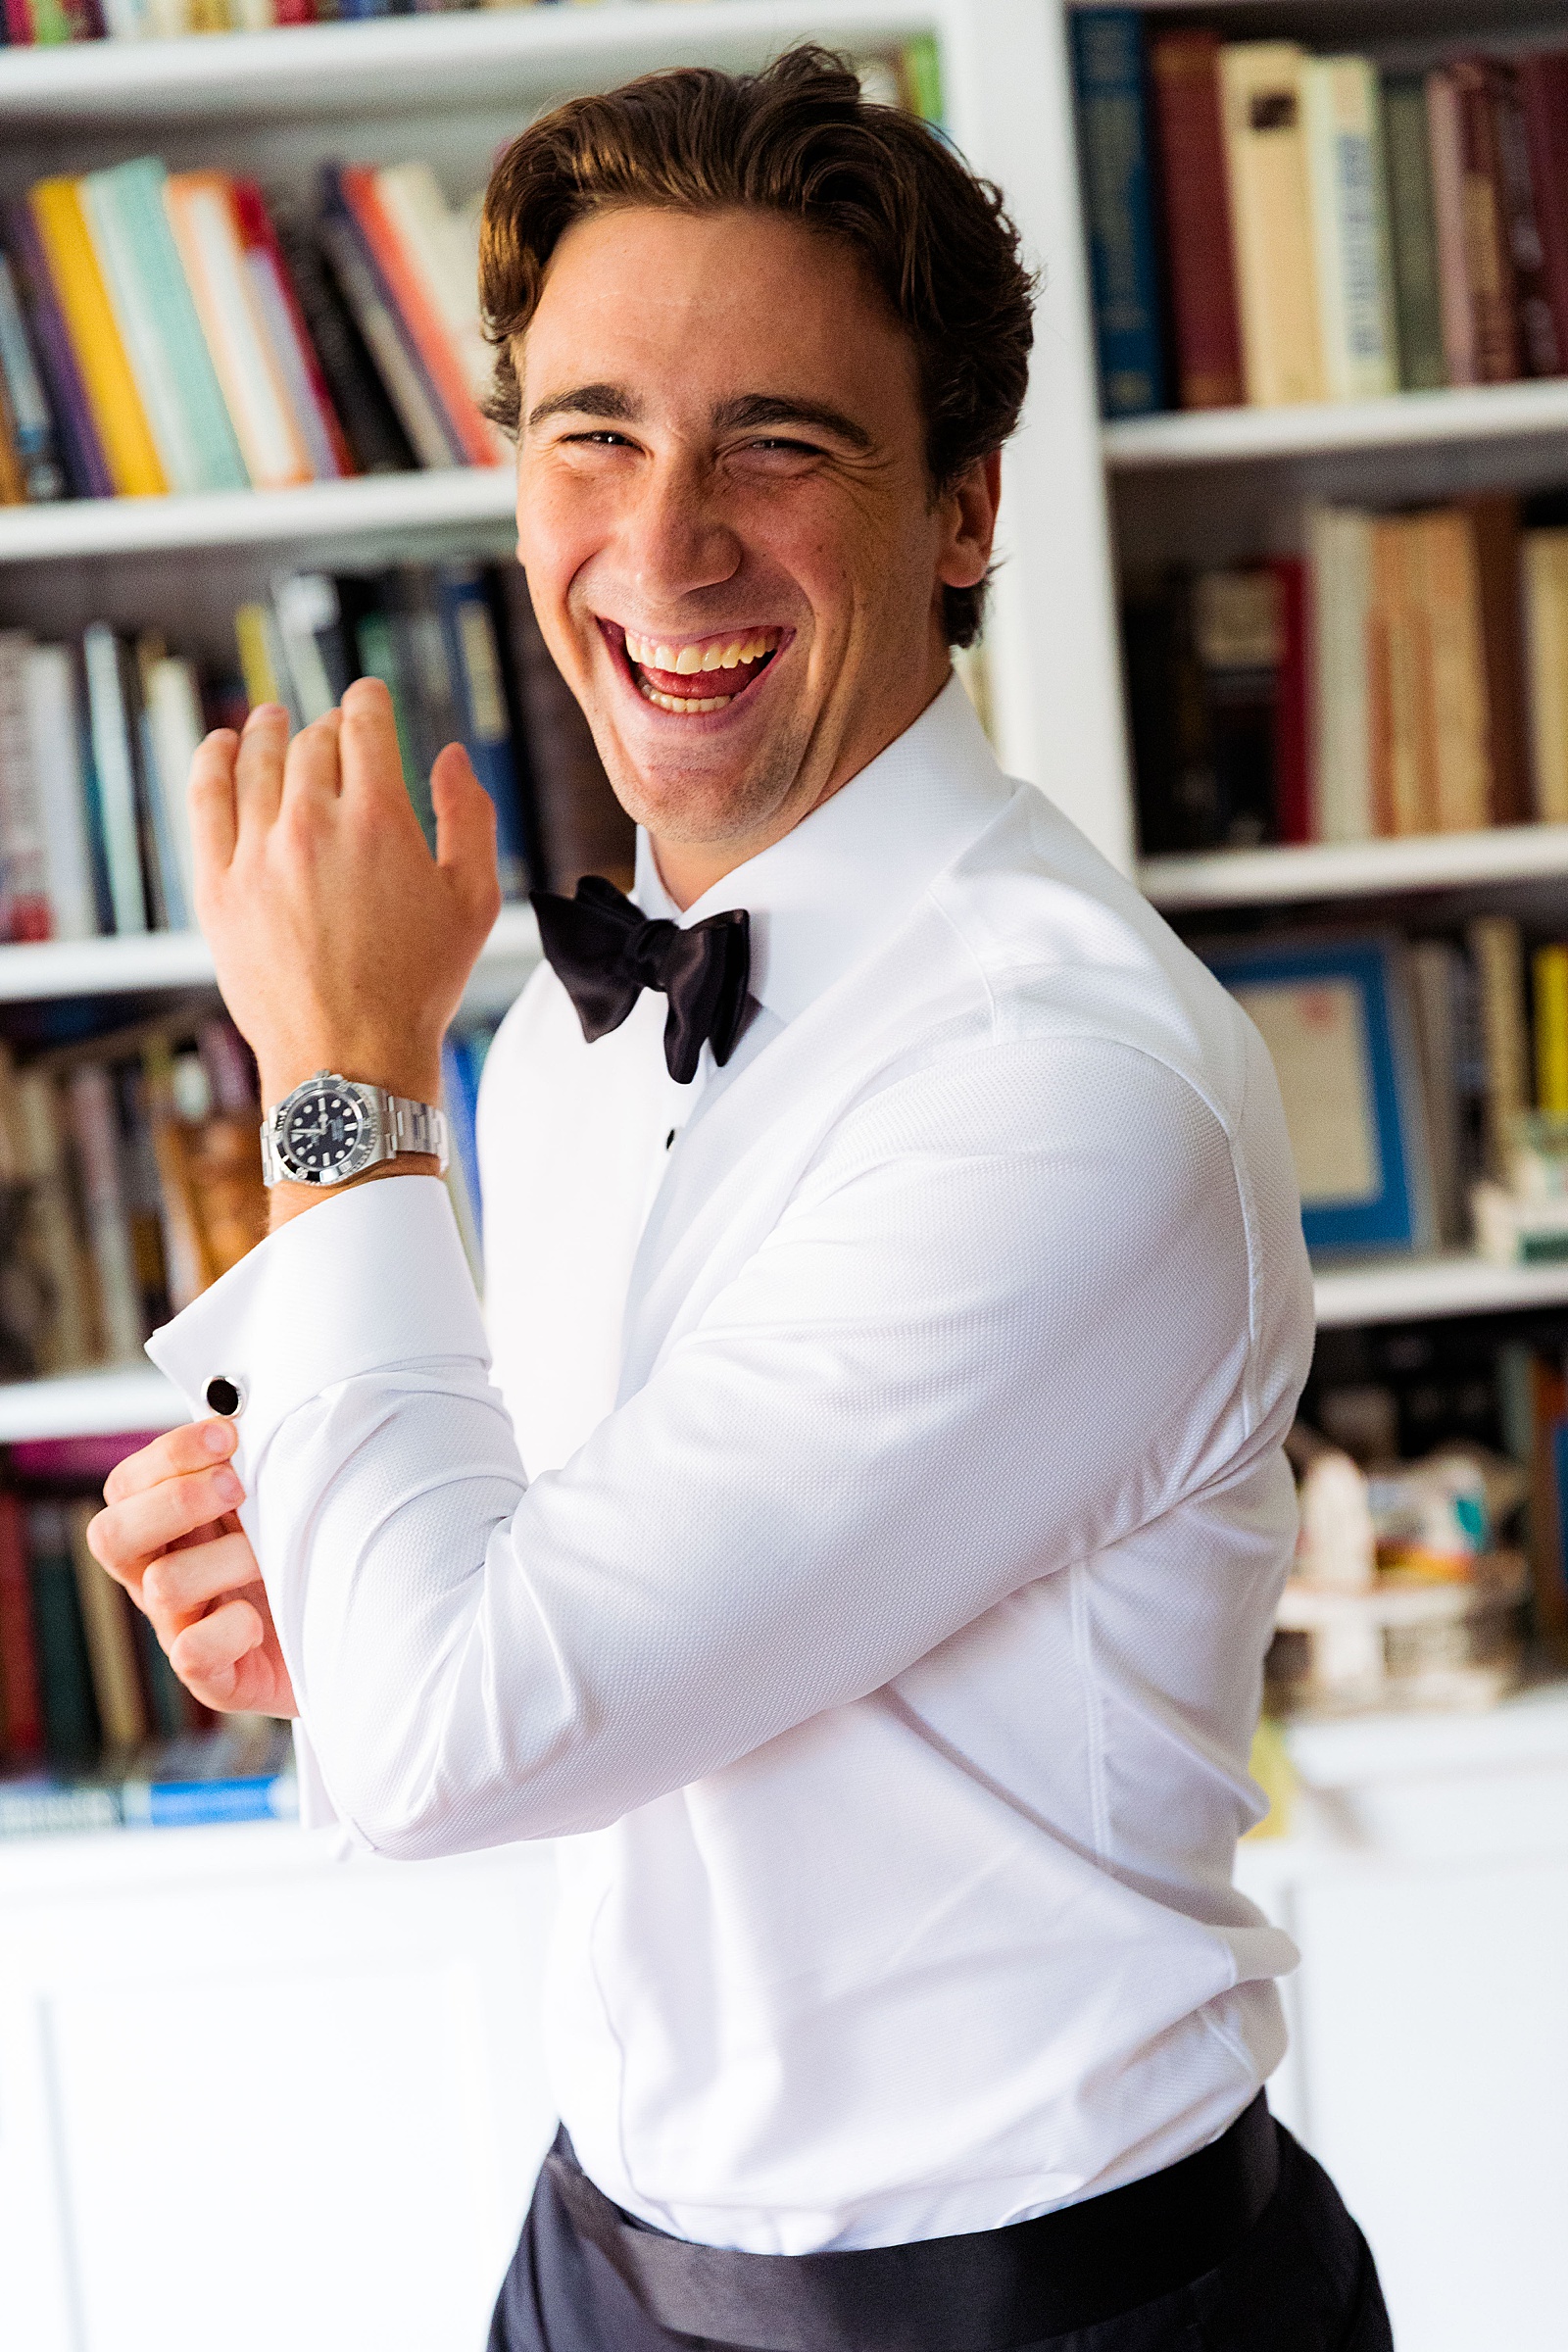 Groom sports a new Rolex